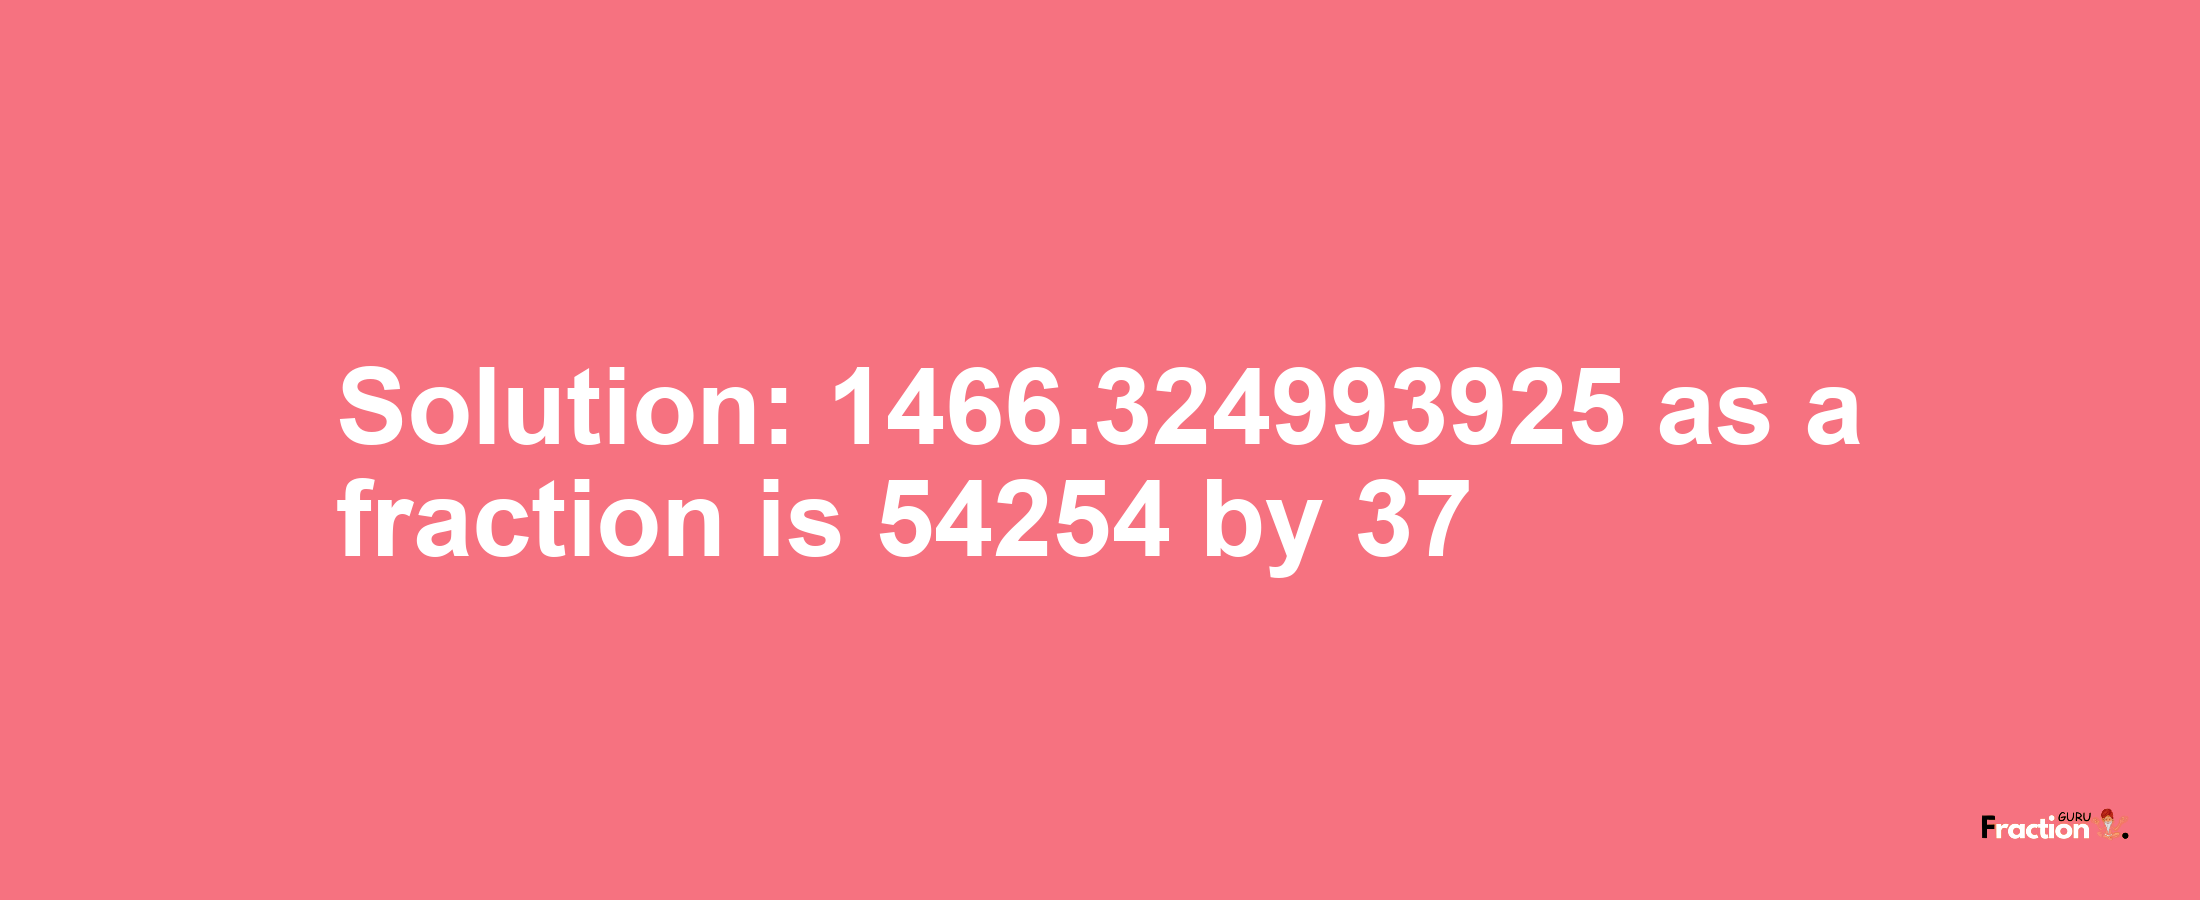 Solution:1466.324993925 as a fraction is 54254/37